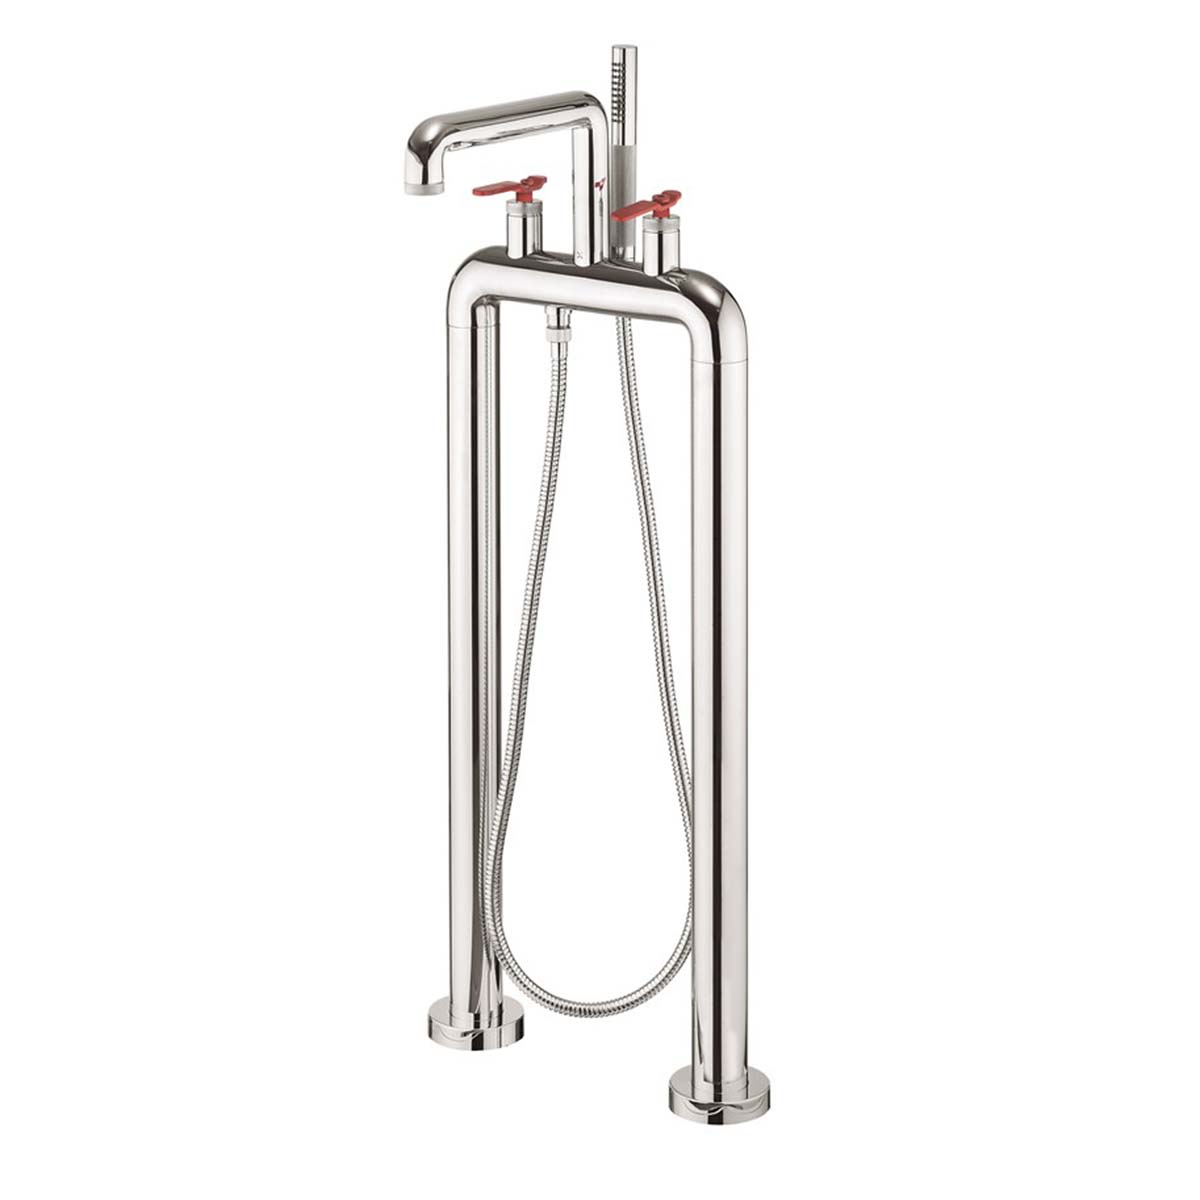 Crosswater Union Bath Shower Mixer With Red Lever Handles Chrome